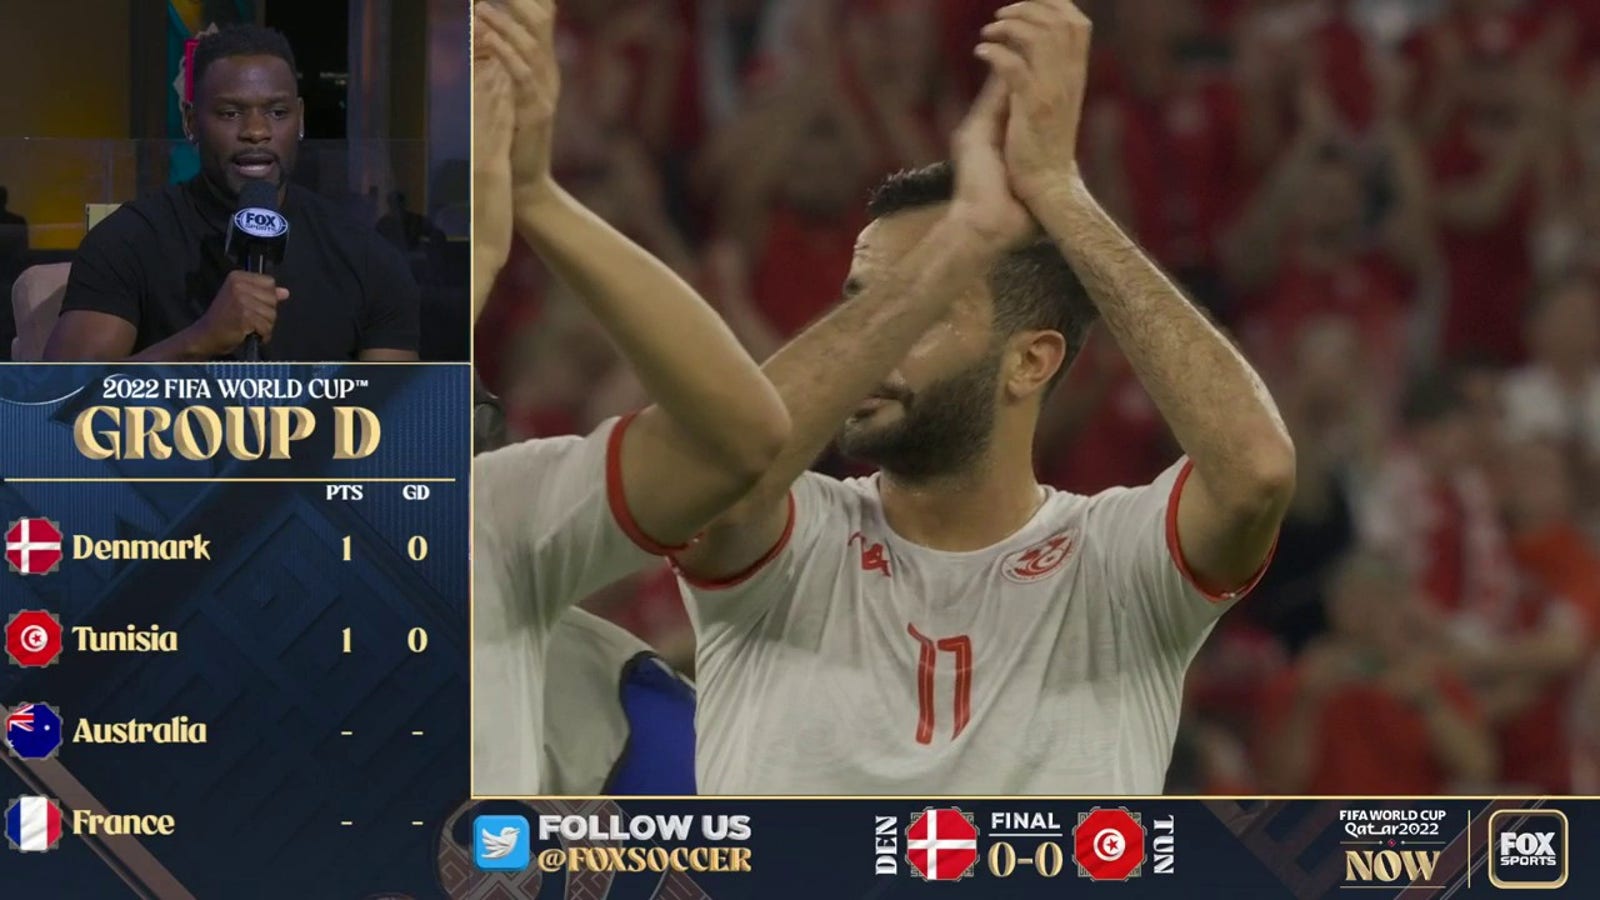 'FIFA World Cup Now' crew breaks down Denmark-Tunisia draw and tone set from the beginning of the match